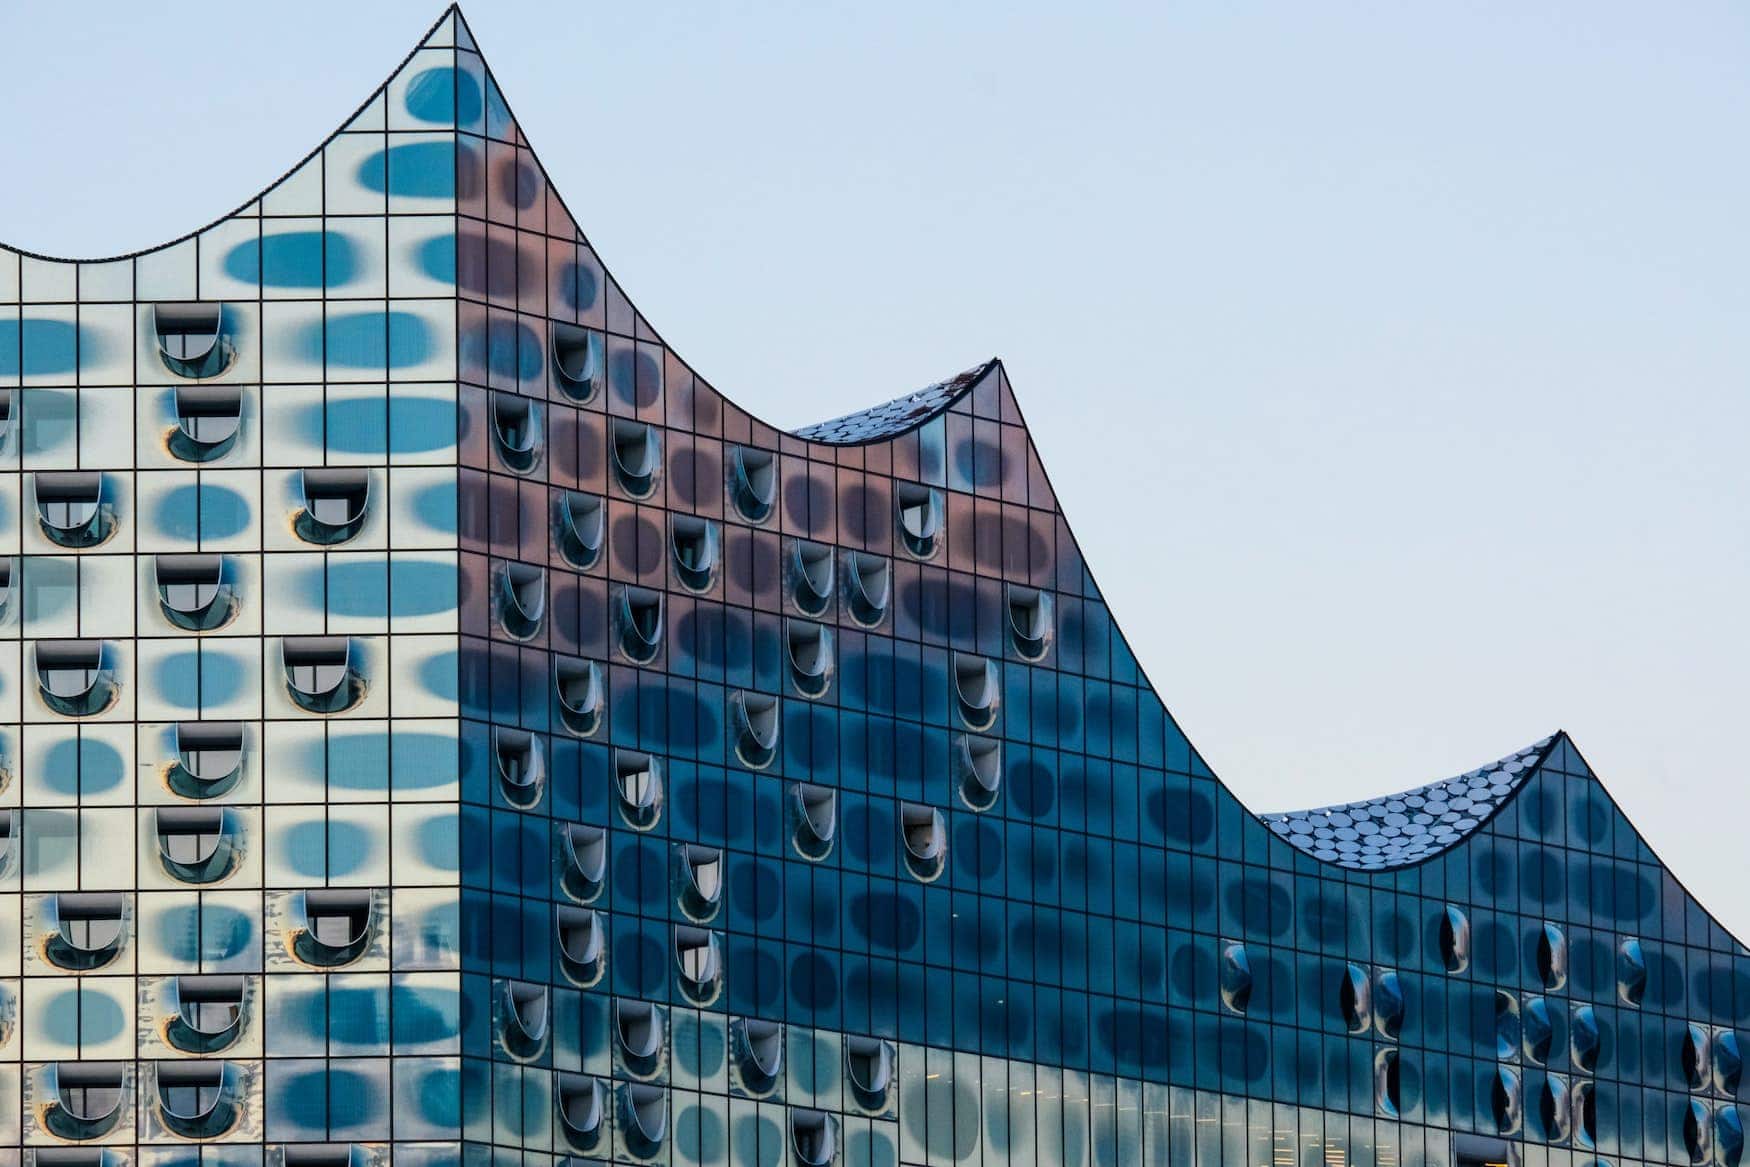 Roof of the Elbphilharmonie in Hamburg, designed by star architects Herzog & de Meuron